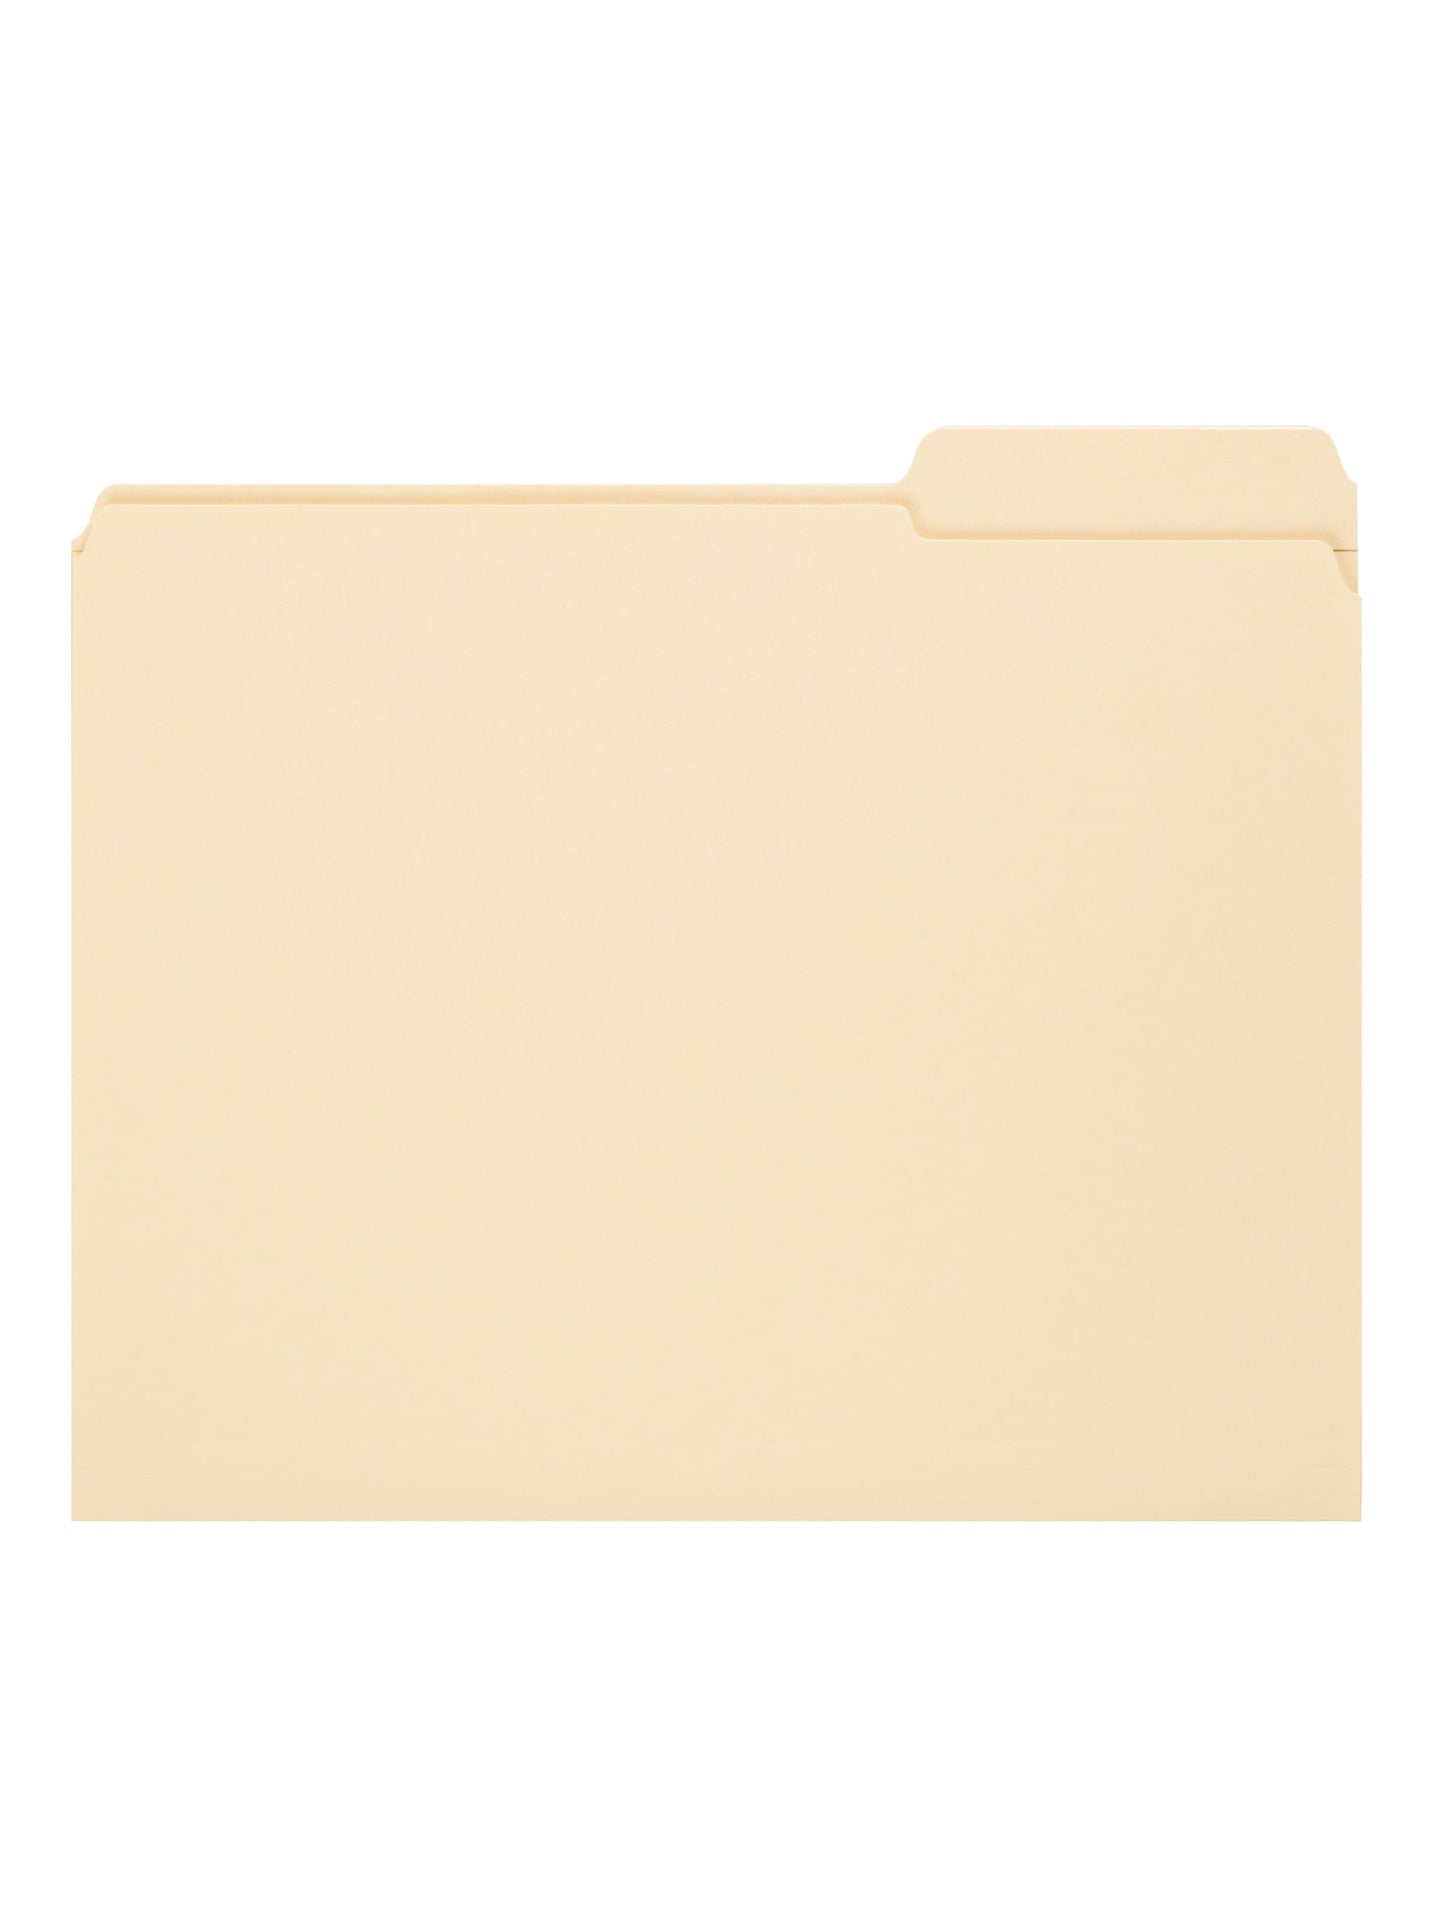 Reinforced Tab File Folders, 1/3-Cut Right Tab, Manila Color, Letter Size, Set of 100, 086486103374